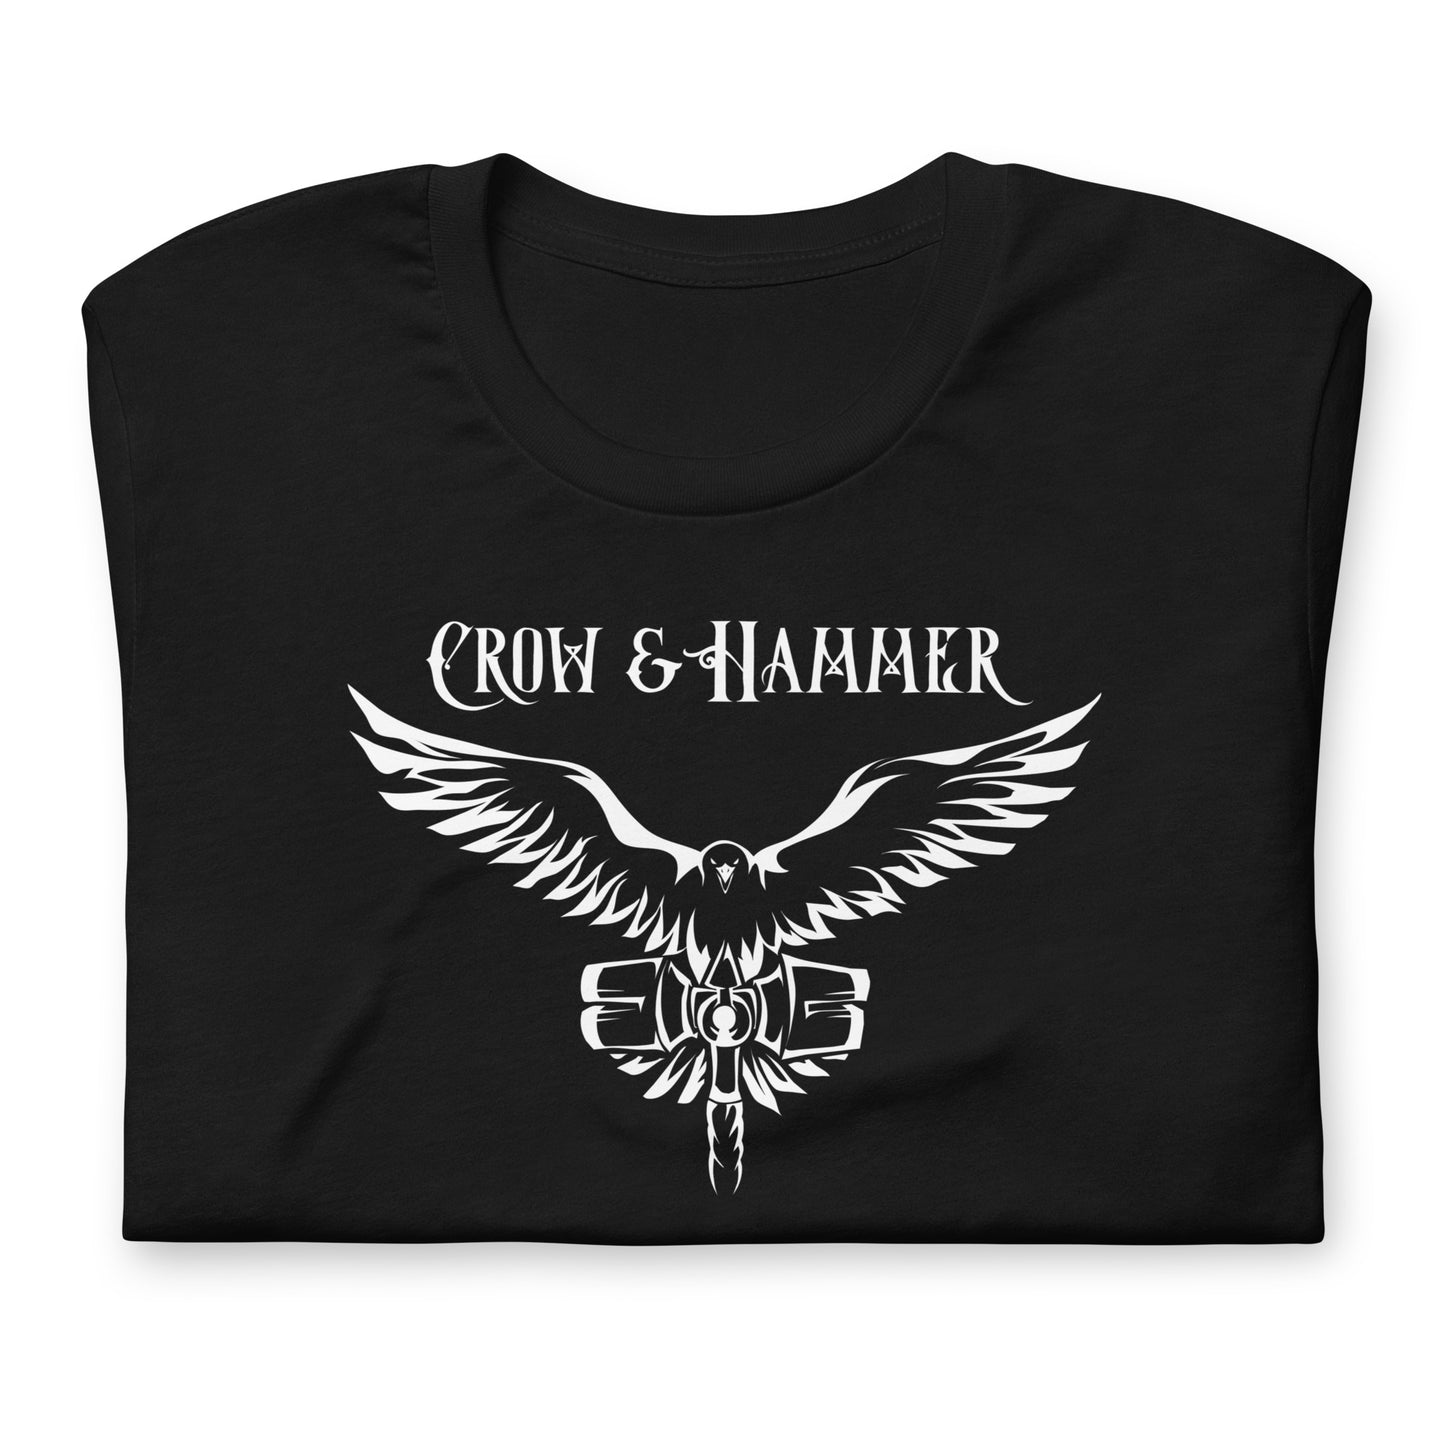 "The Crow & Hammer" Unisex T-shirt (The Guild Codex)